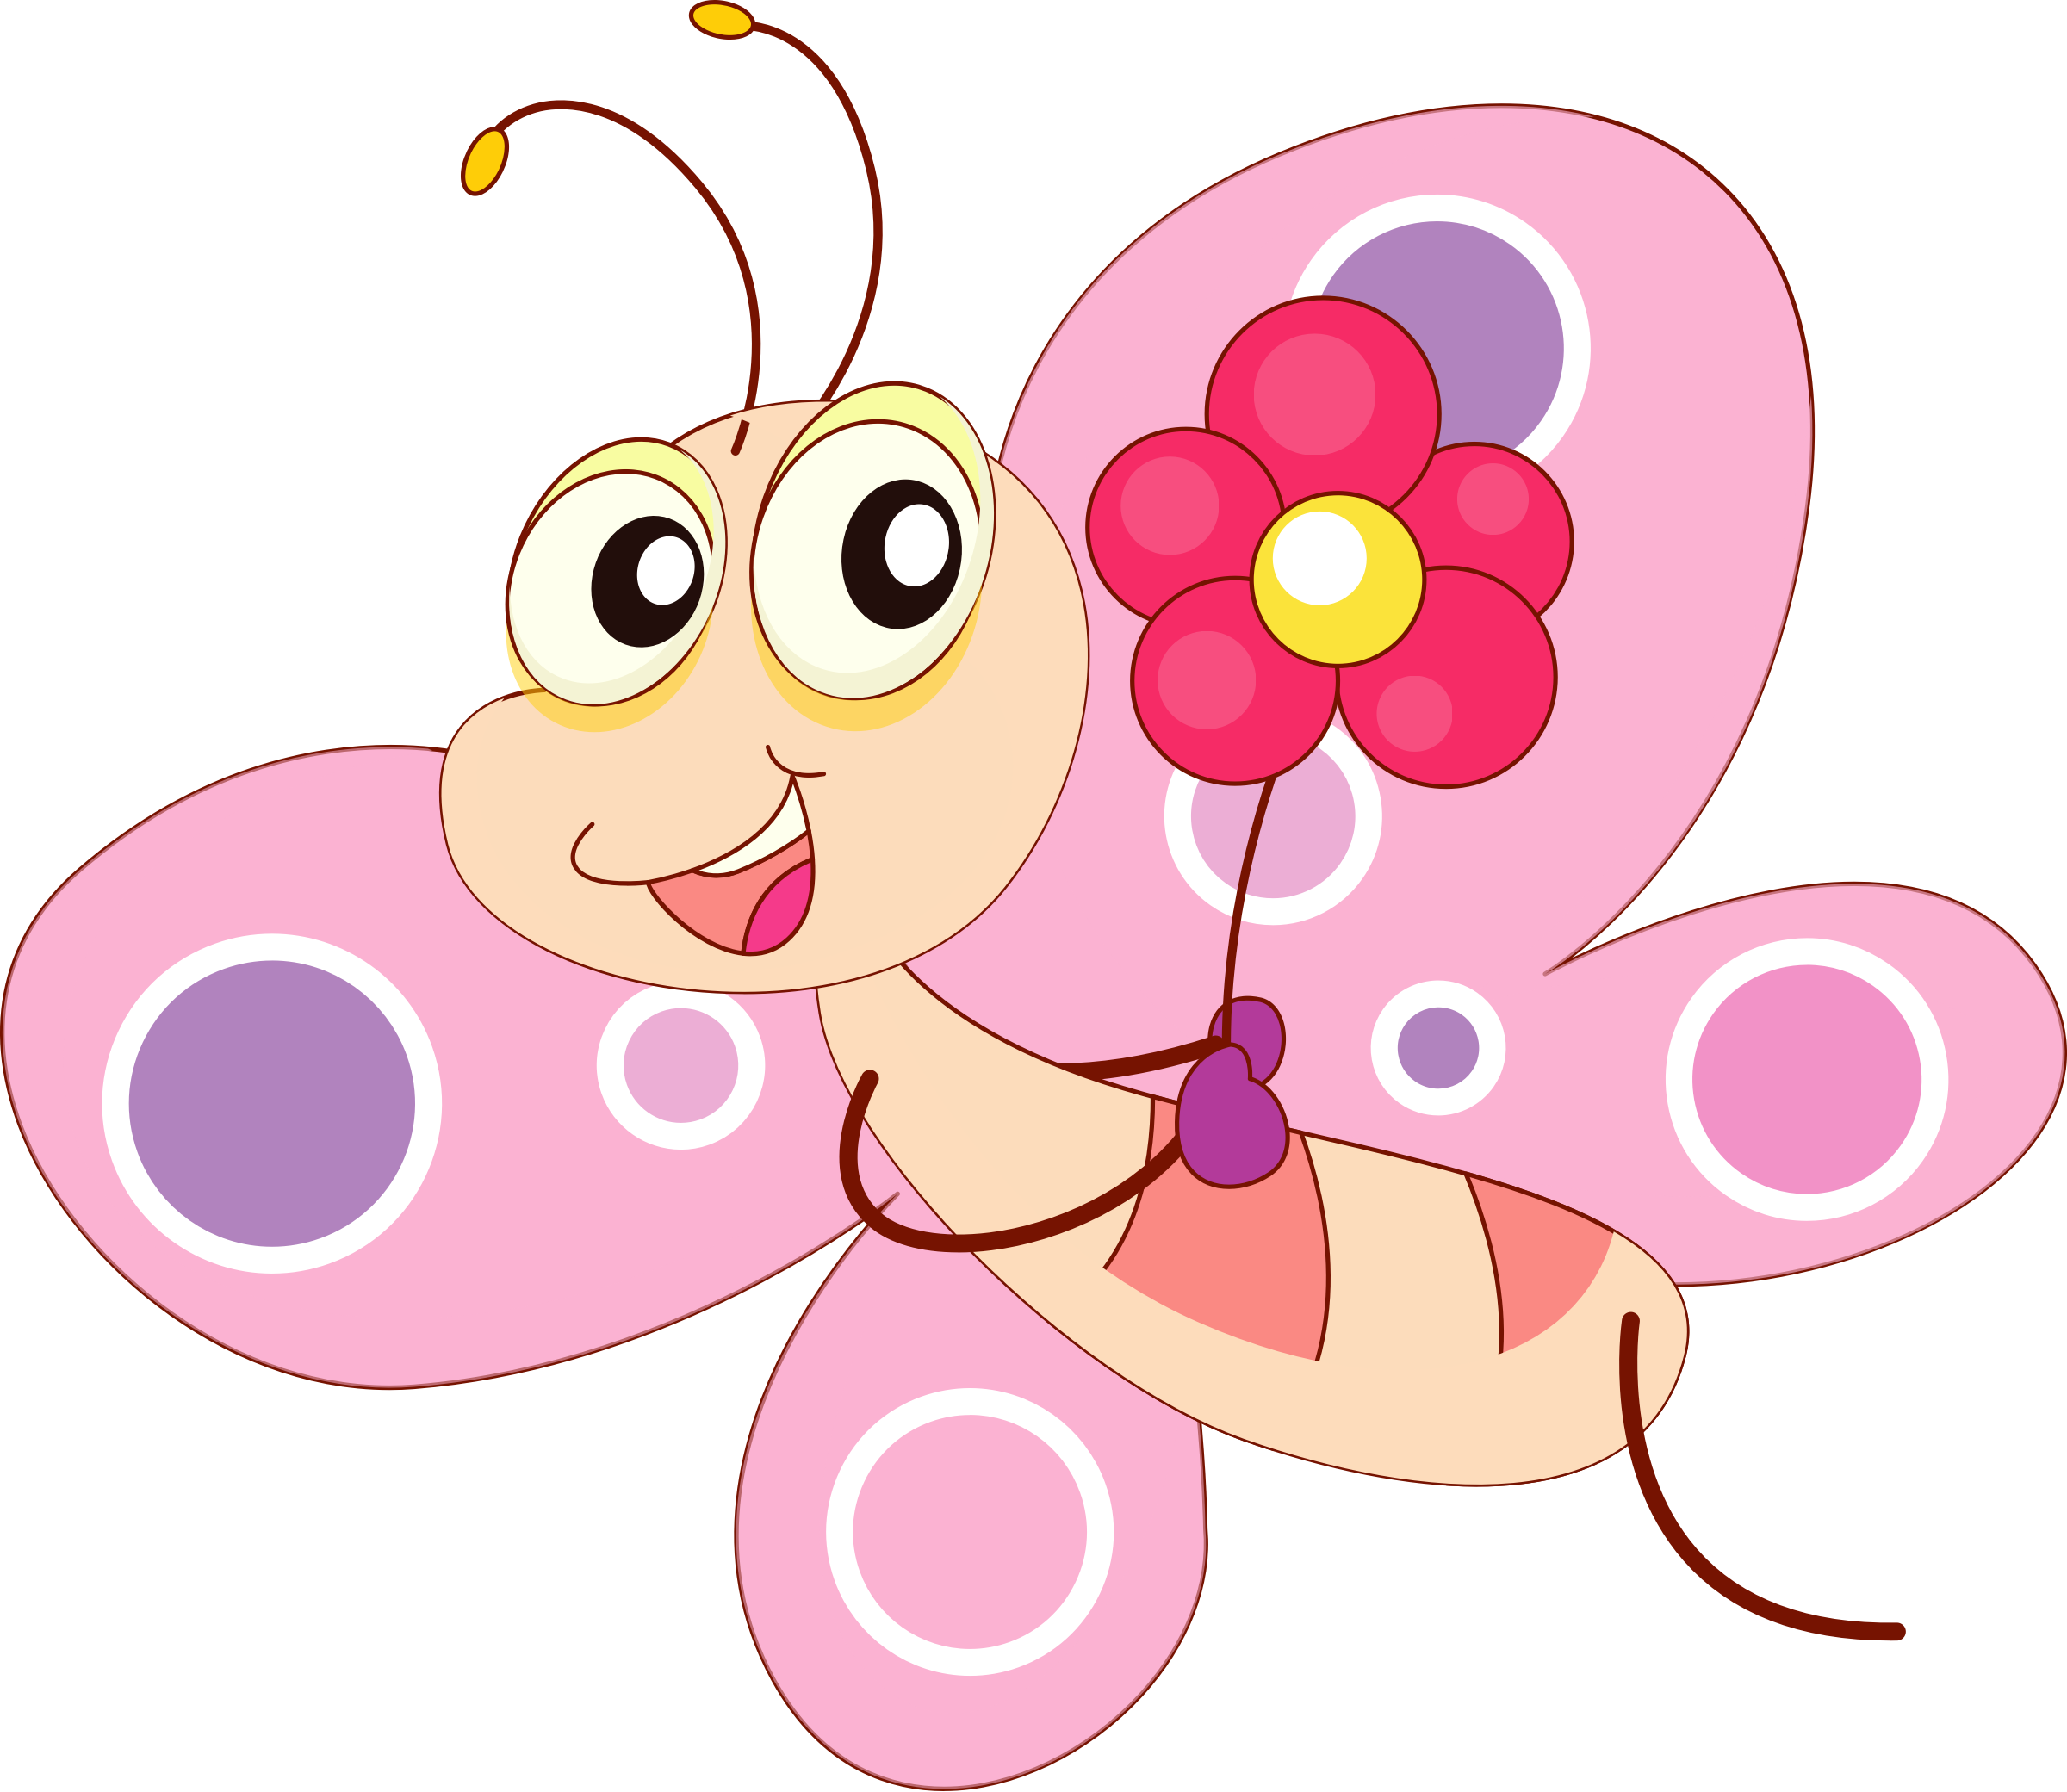 Download Pink Butterfly Vector Clipart image - Free stock photo ...